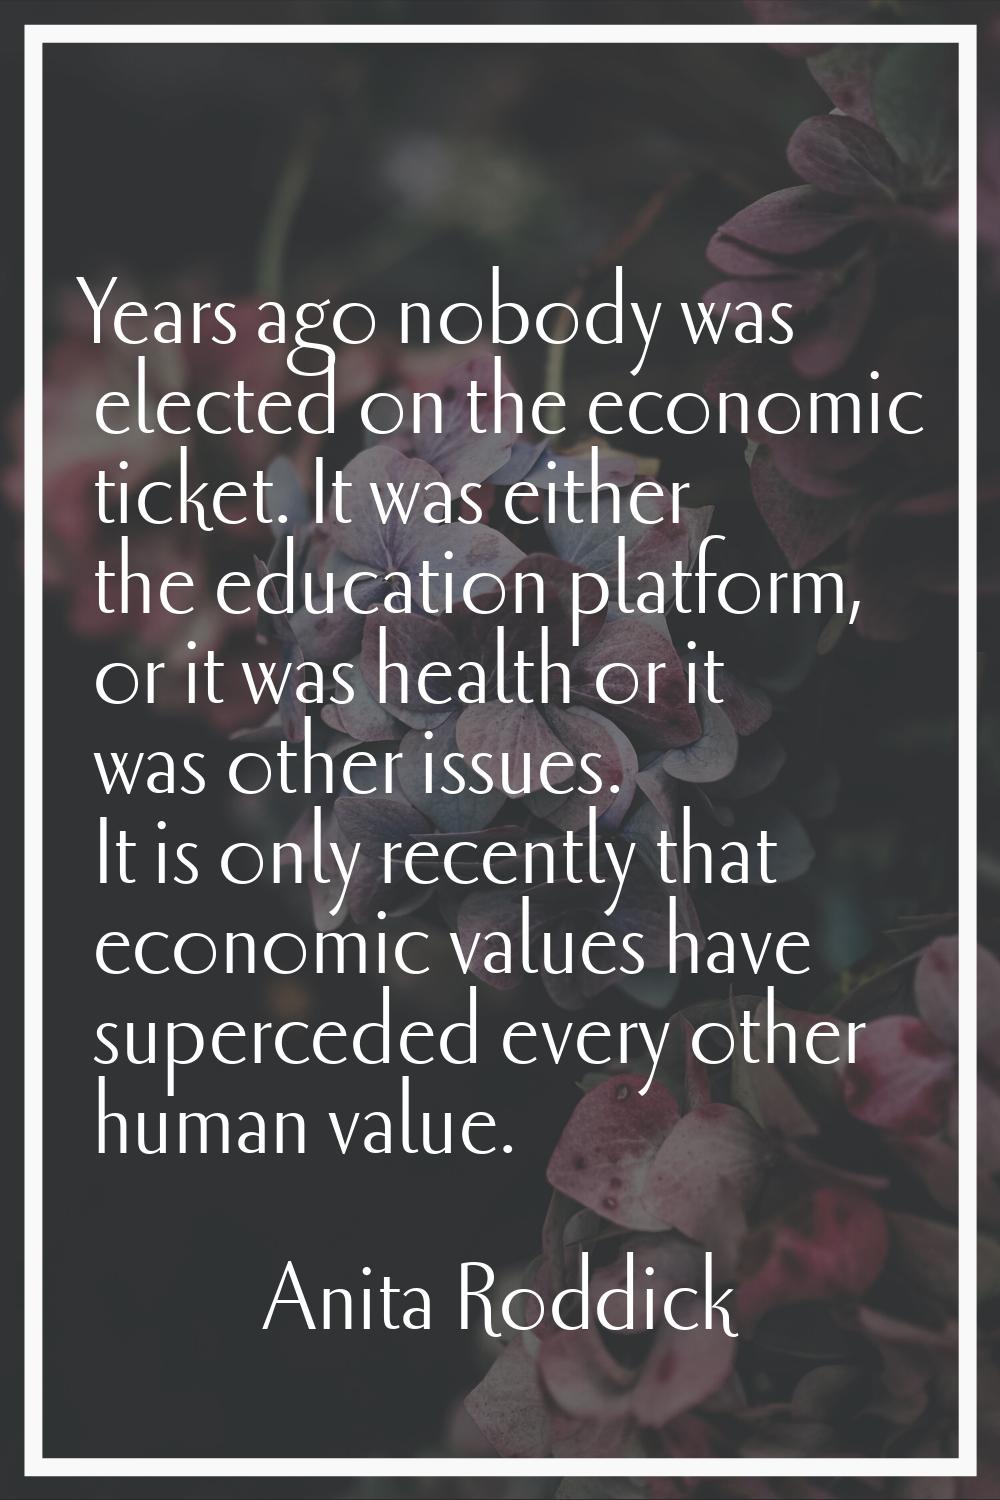 Years ago nobody was elected on the economic ticket. It was either the education platform, or it wa